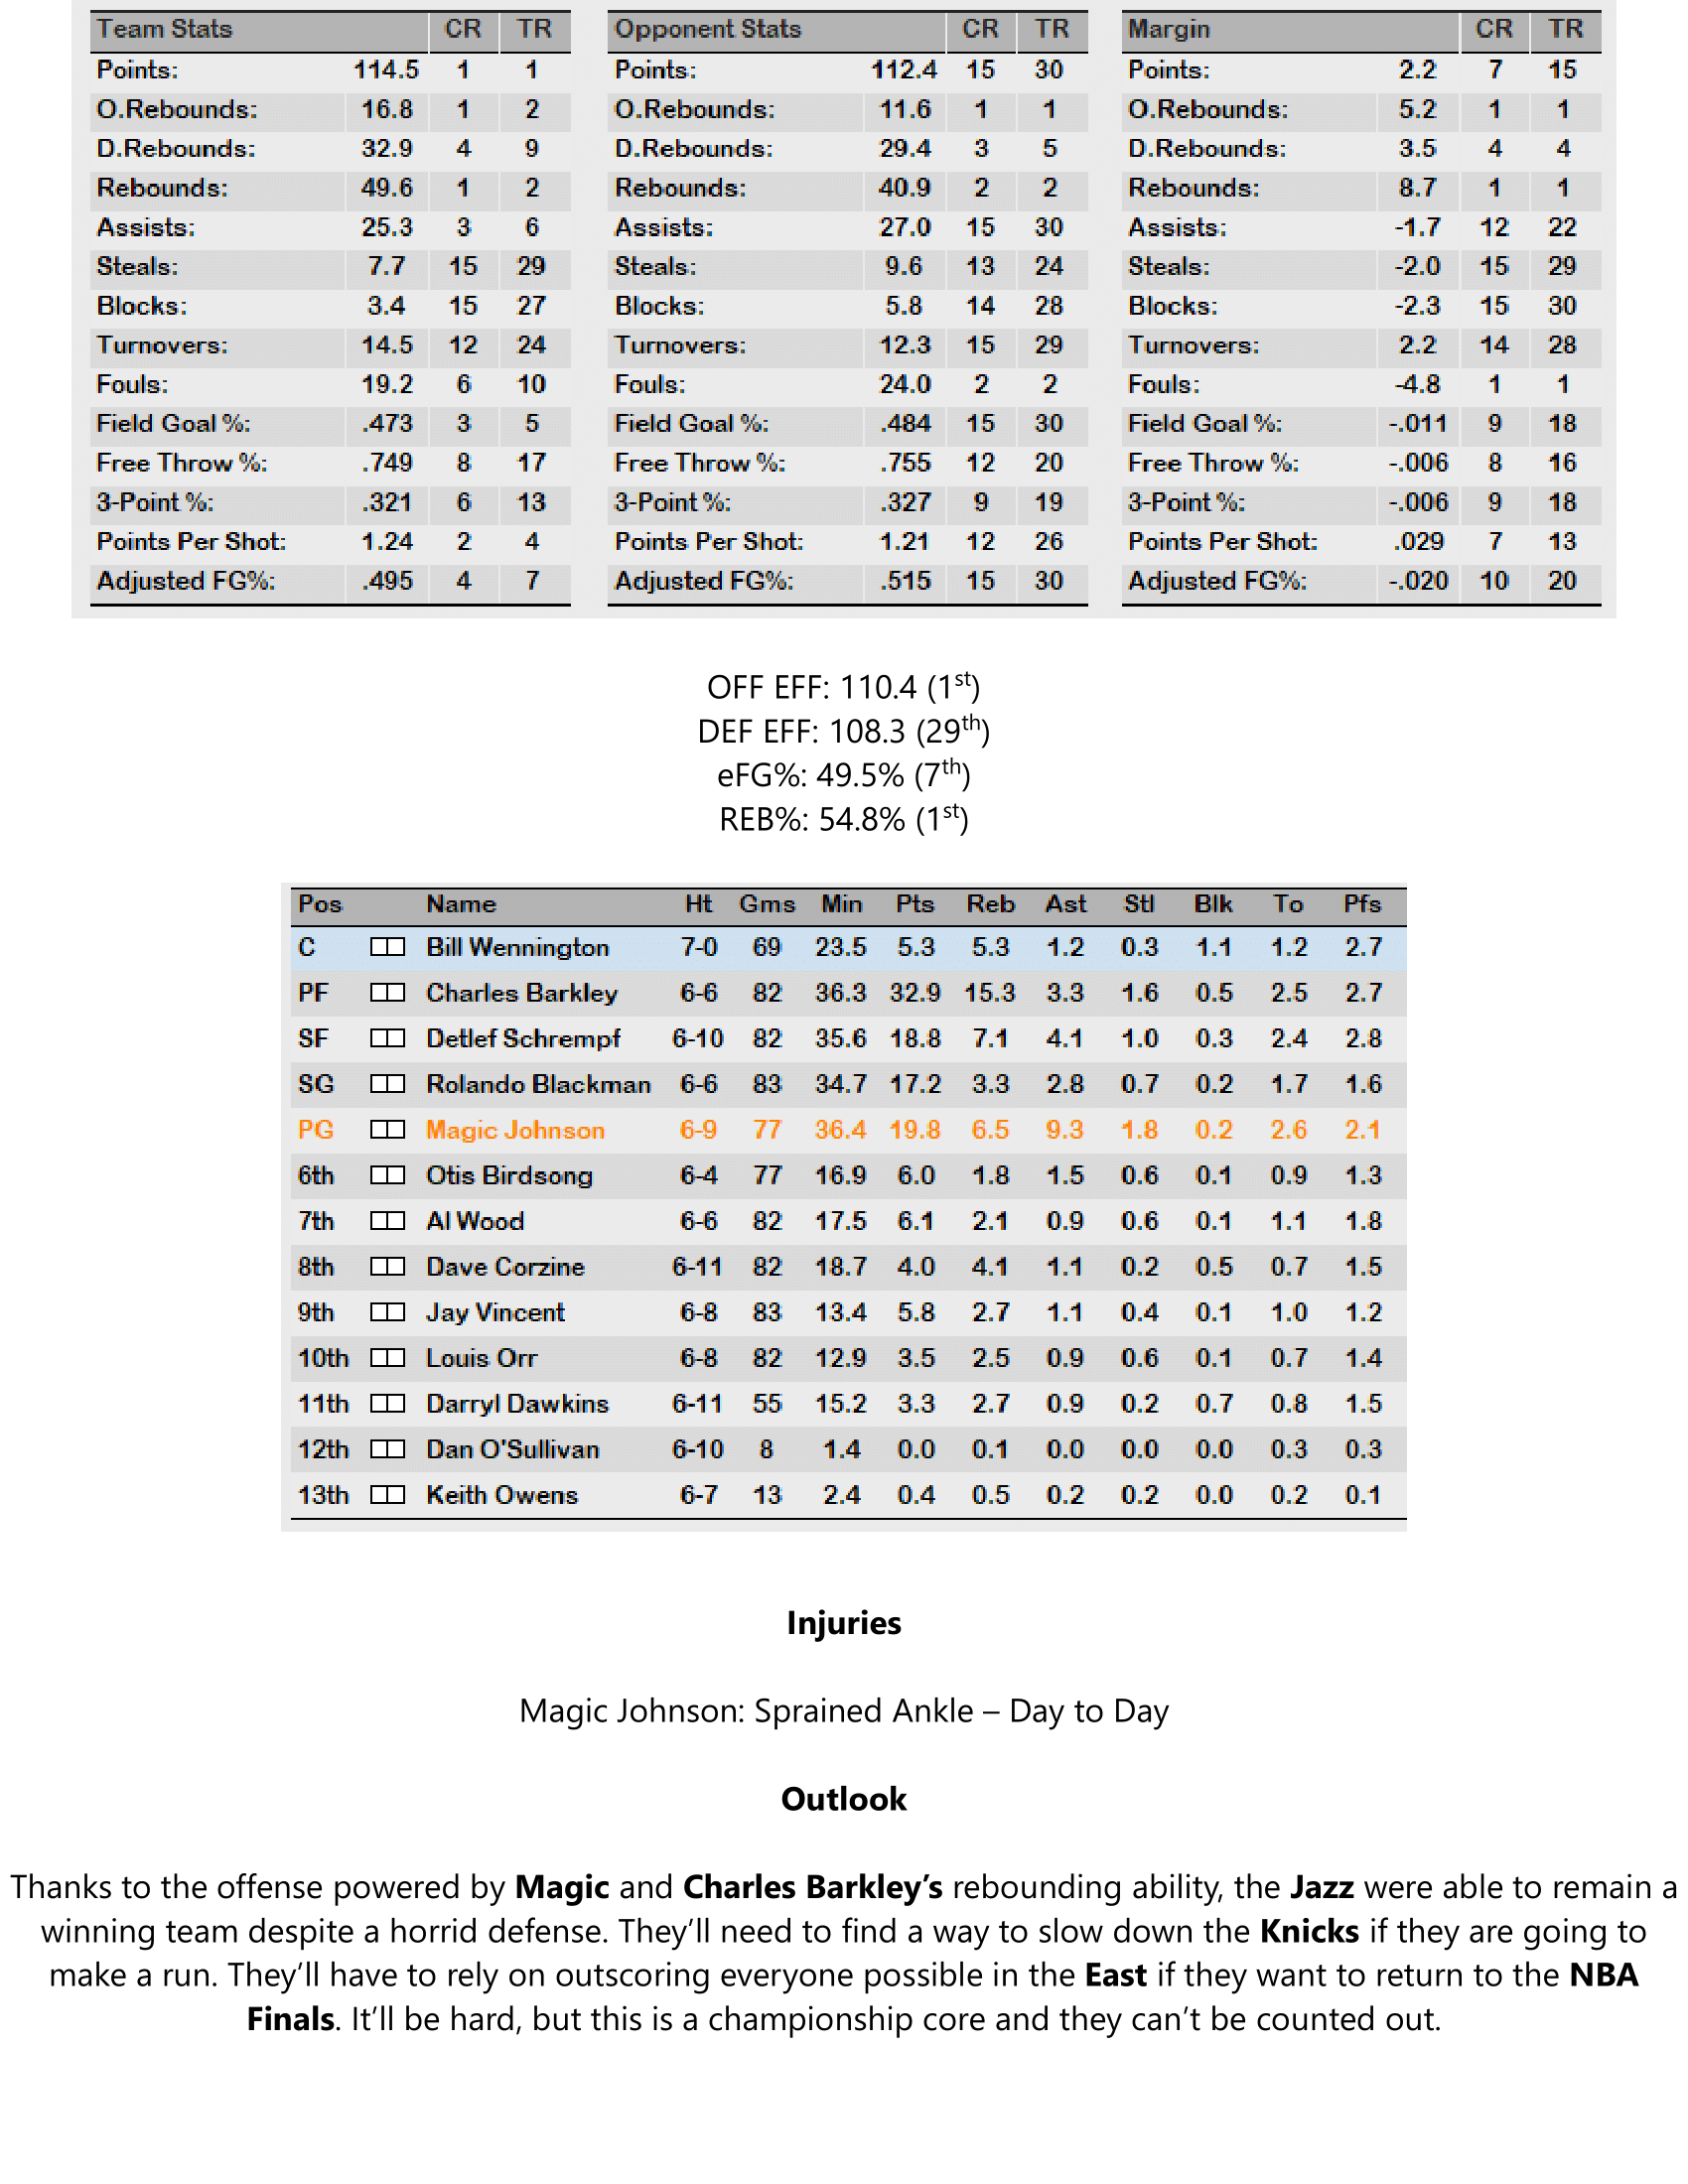 91-92-Part-4-Playoff-Preview-22.png